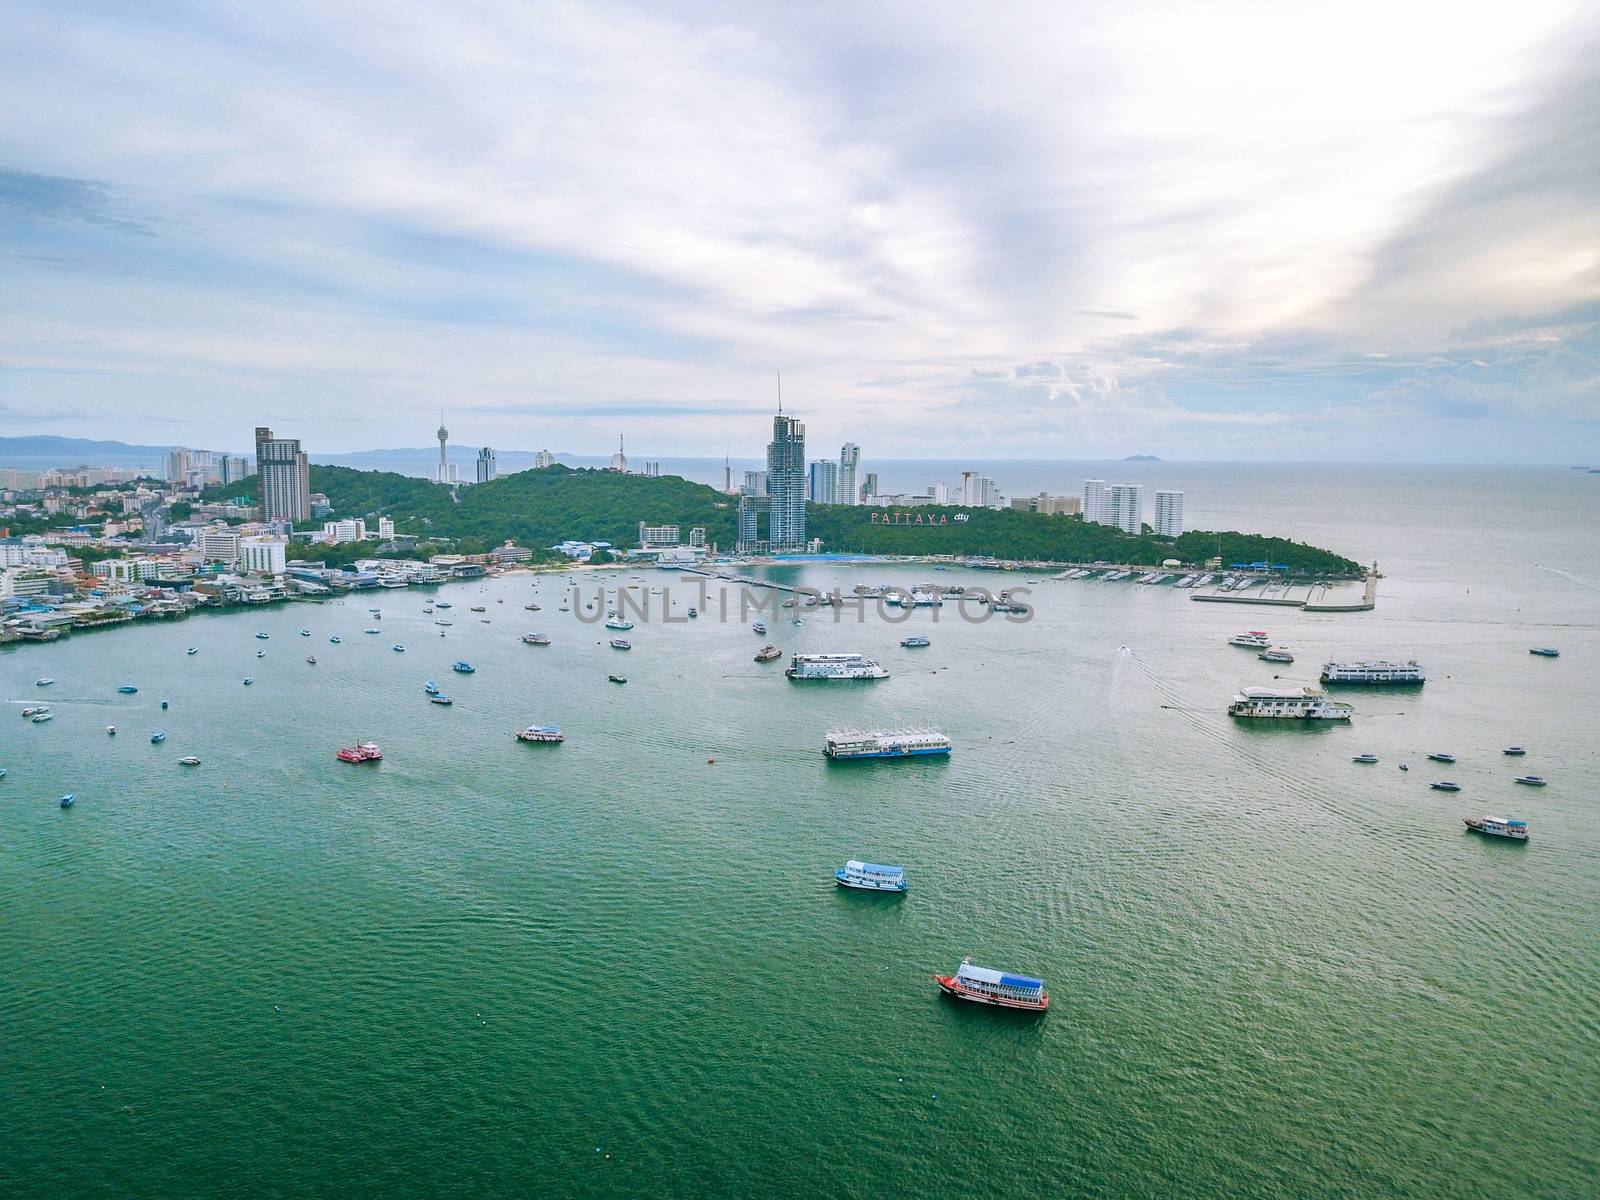 Pattaya cityscape aerial view from the sea by antpkr